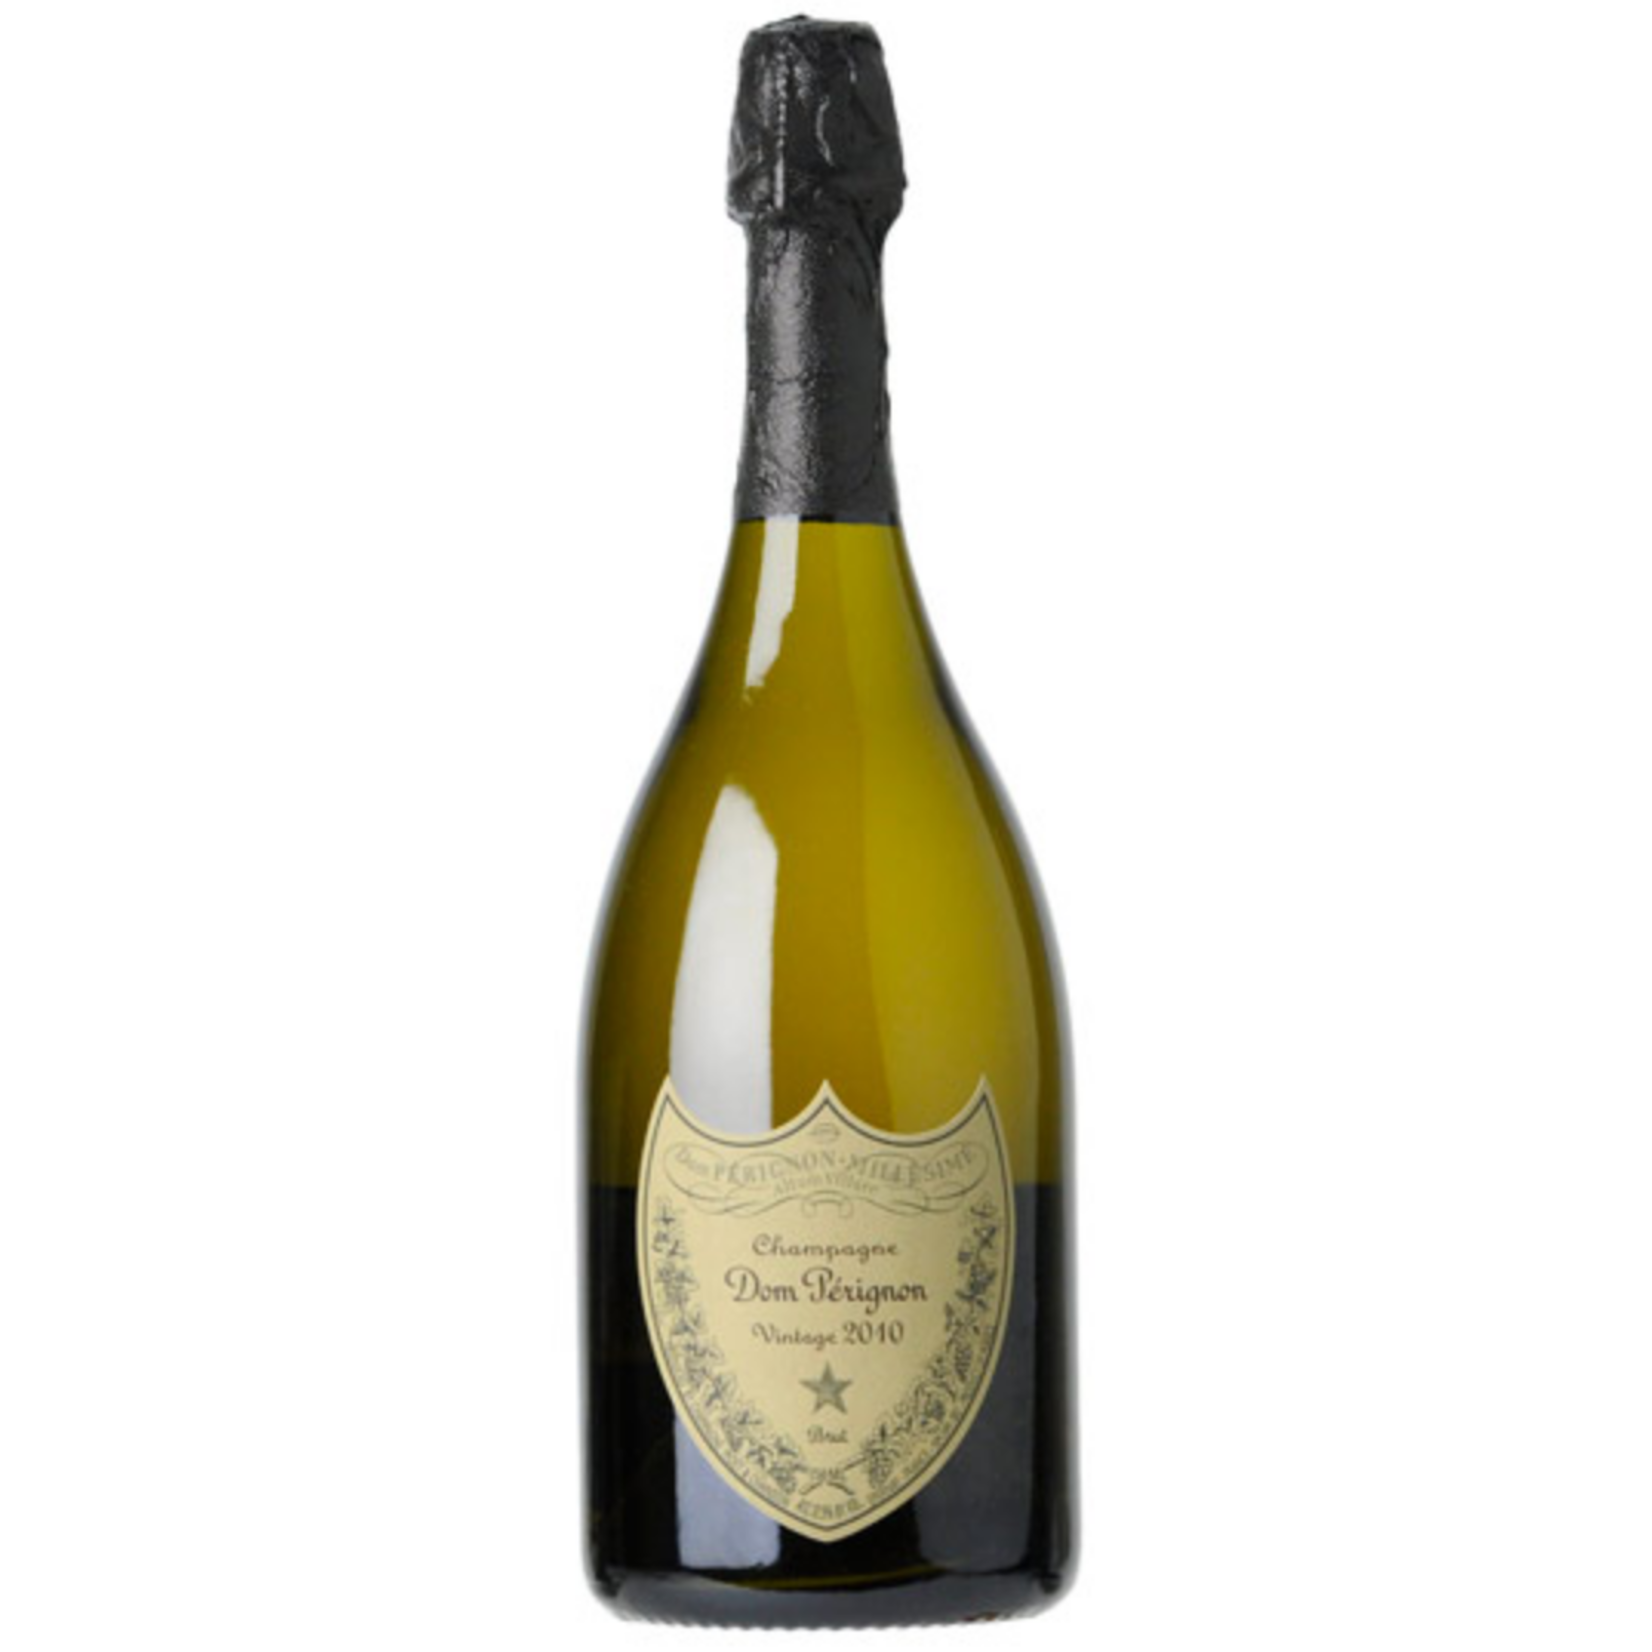 2010, Vintage Dom Perignon Brut, Champagne, Epernay, Champagne, France, 12.5% Alc, CT